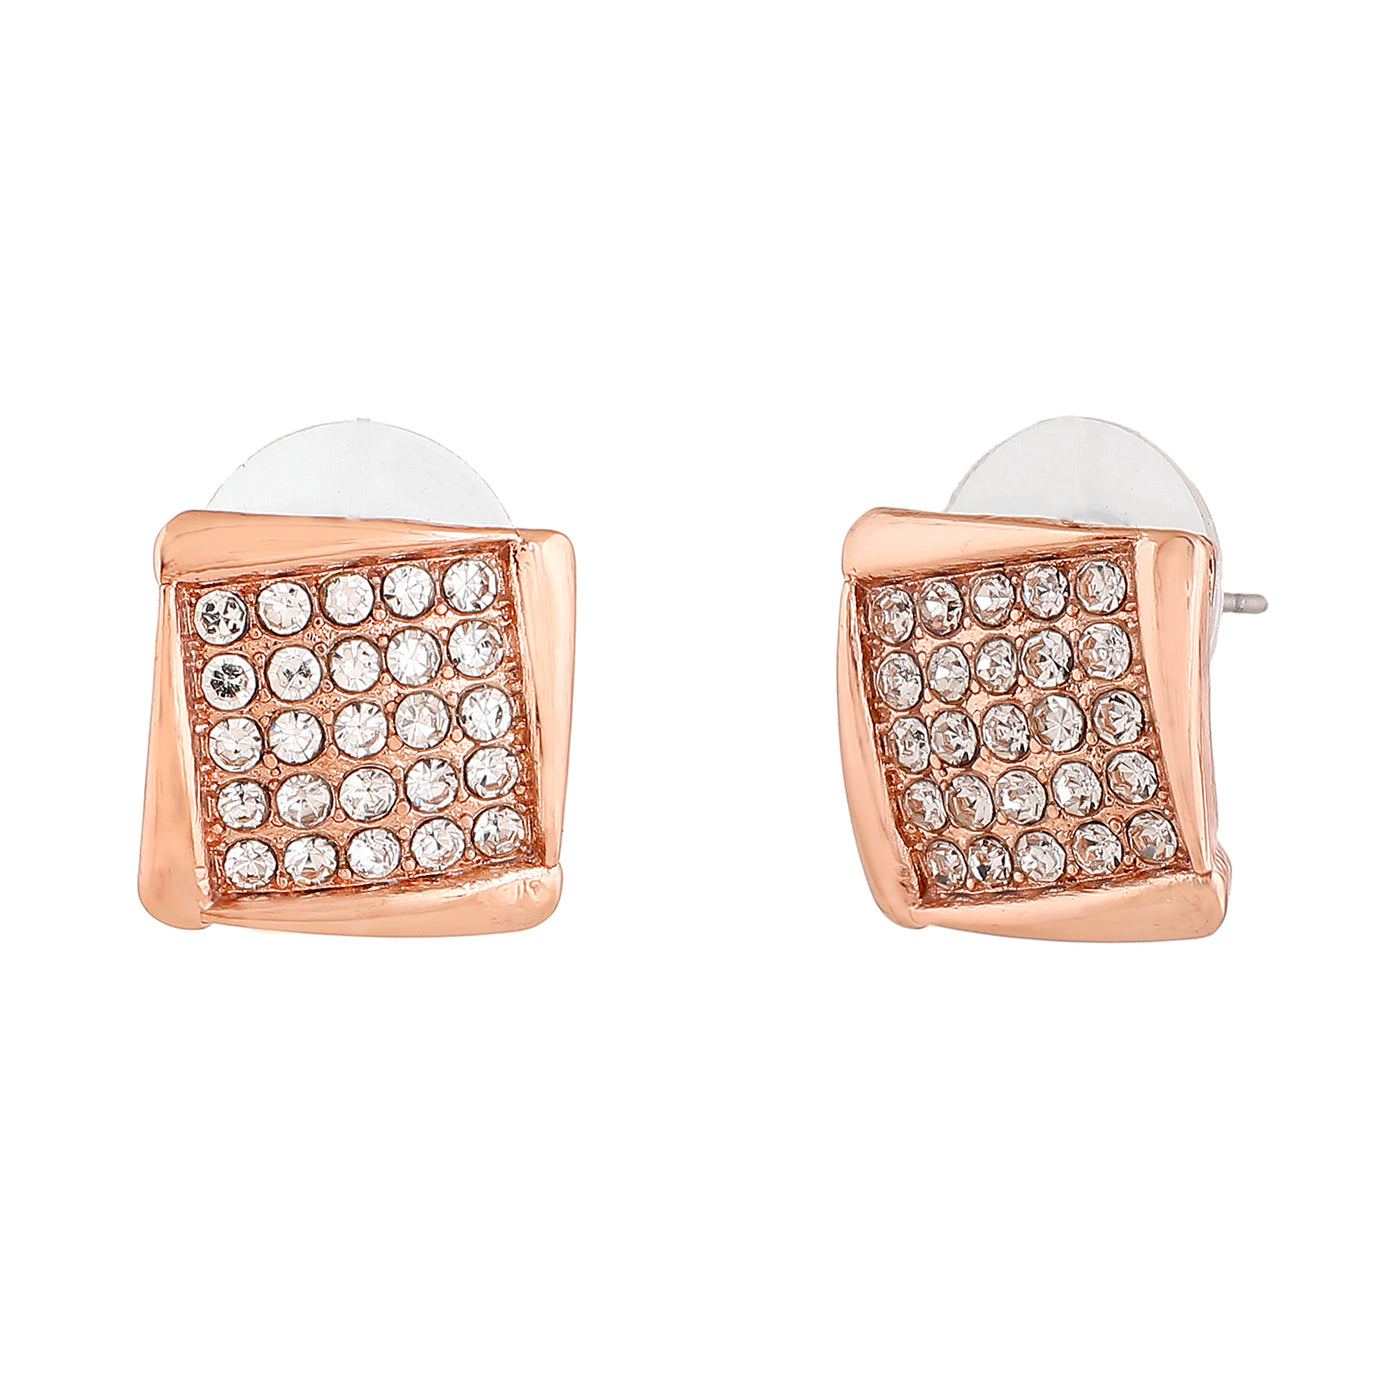 Estele Rose Gold Plated Square Shaped Stud Earrings With White Austrian Crystals for Women